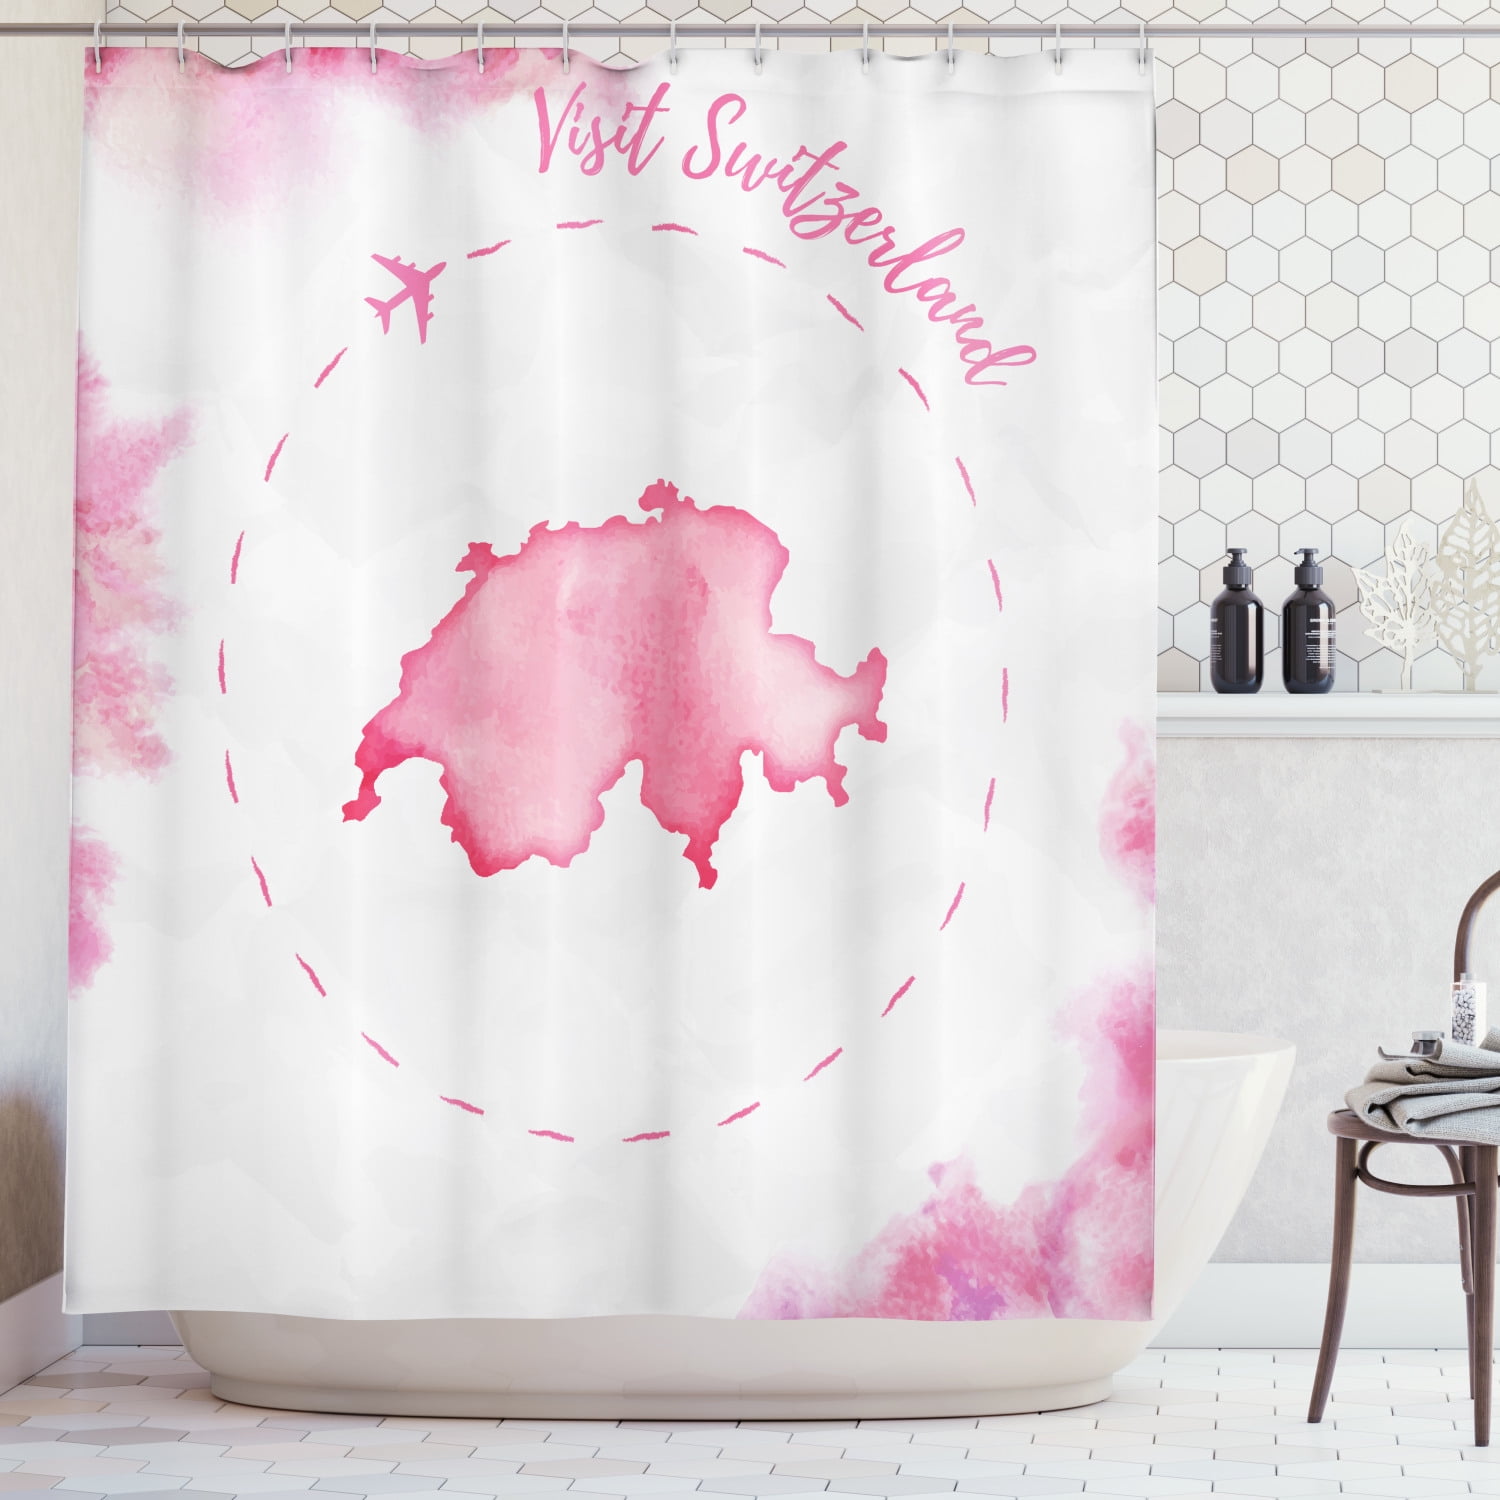 Paint Stains Fabric Bathroom Set, How To Paint A Fabric Shower Curtain